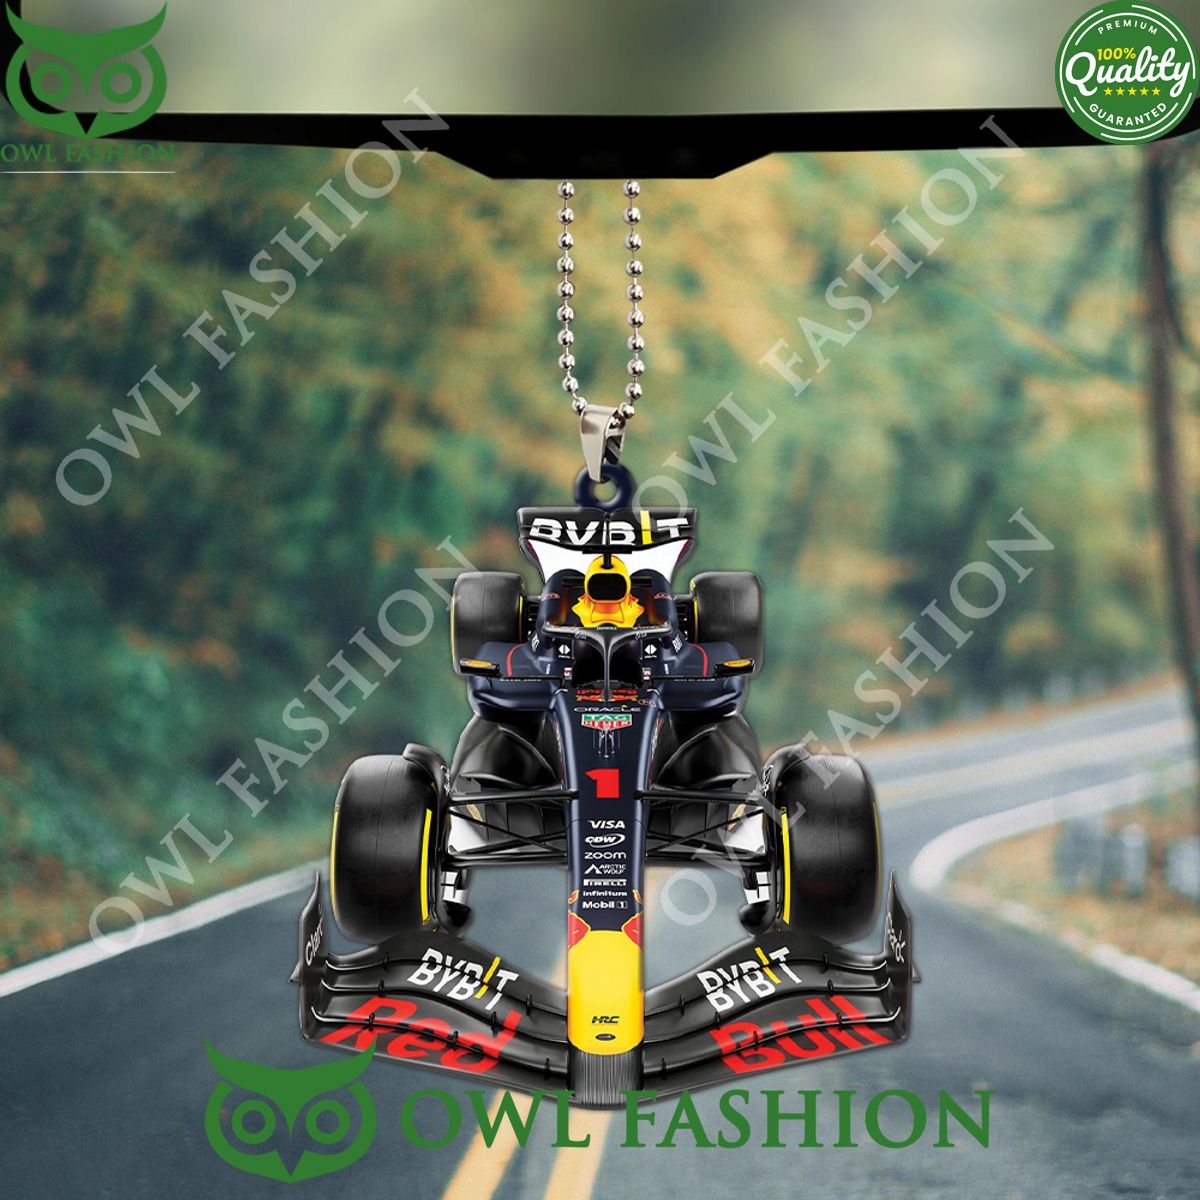 Red Bull Racing F1 Racing Champion Car Ornament I am in love with your dress